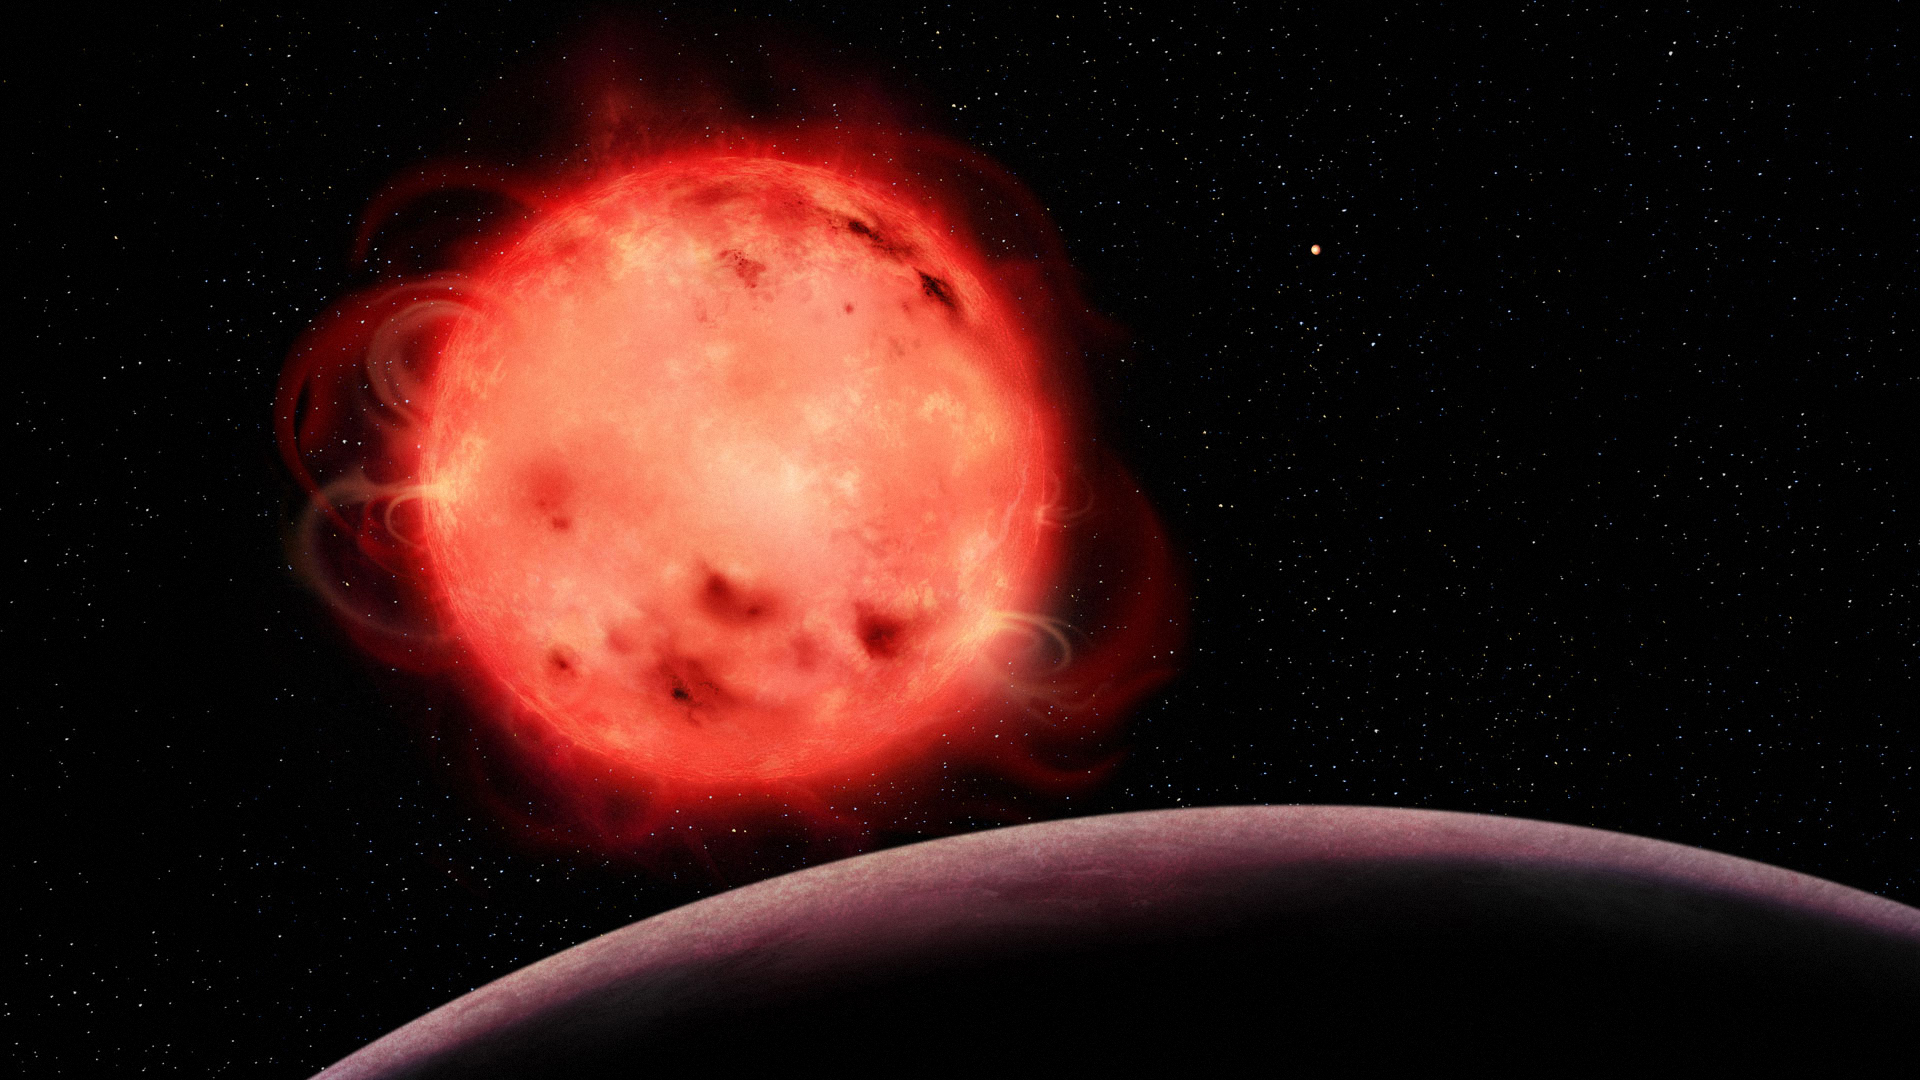 This artistic representation of the TRAPPIST-1 red dwarf star showcases its very active nature. The star appears to have many stellar spots (colder regions of its surface, similar to sunspots) and flares. The exoplanet TRAPPIST-1 b, the closest planet to the system’s central star, can be seen in the foreground with no apparent atmosphere. The exoplanet TRAPPIST-1 g, one of the planets in the system’s habitable zone, can be seen in the background to the right of the star. The TRAPPIST-1 system contains seven Earth-sized exoplanets. (Credit: Benoît Gougeon, Université de Montréal)